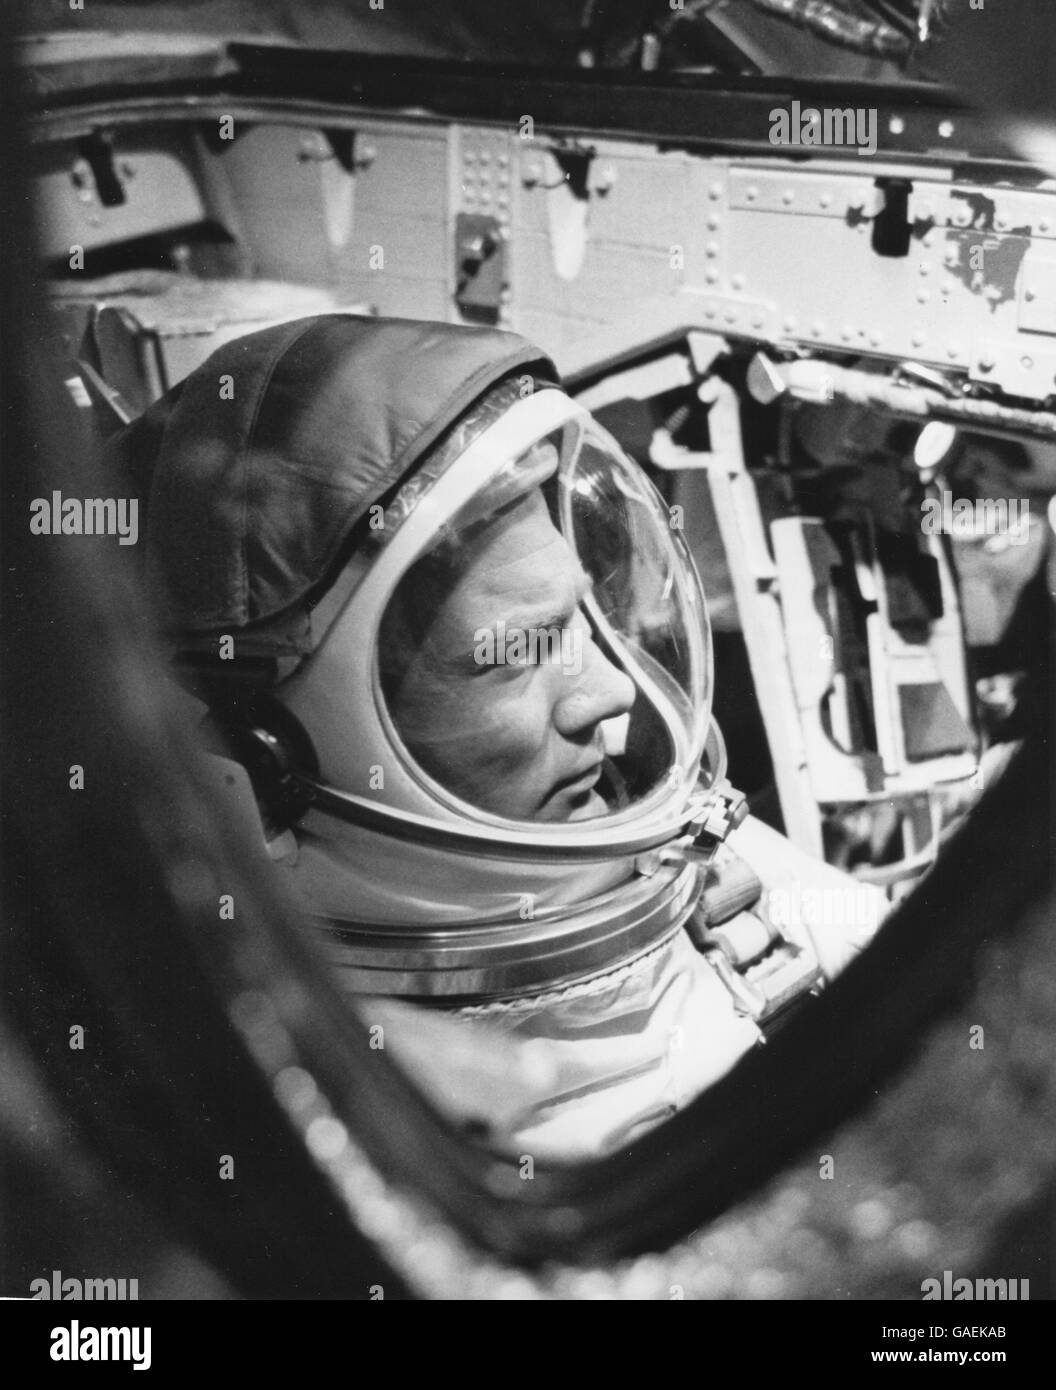 Gemini 12 Astronaut Edwin E. 'Buzz' Aldrin checks out spacecraft during a simulated test. Stock Photo